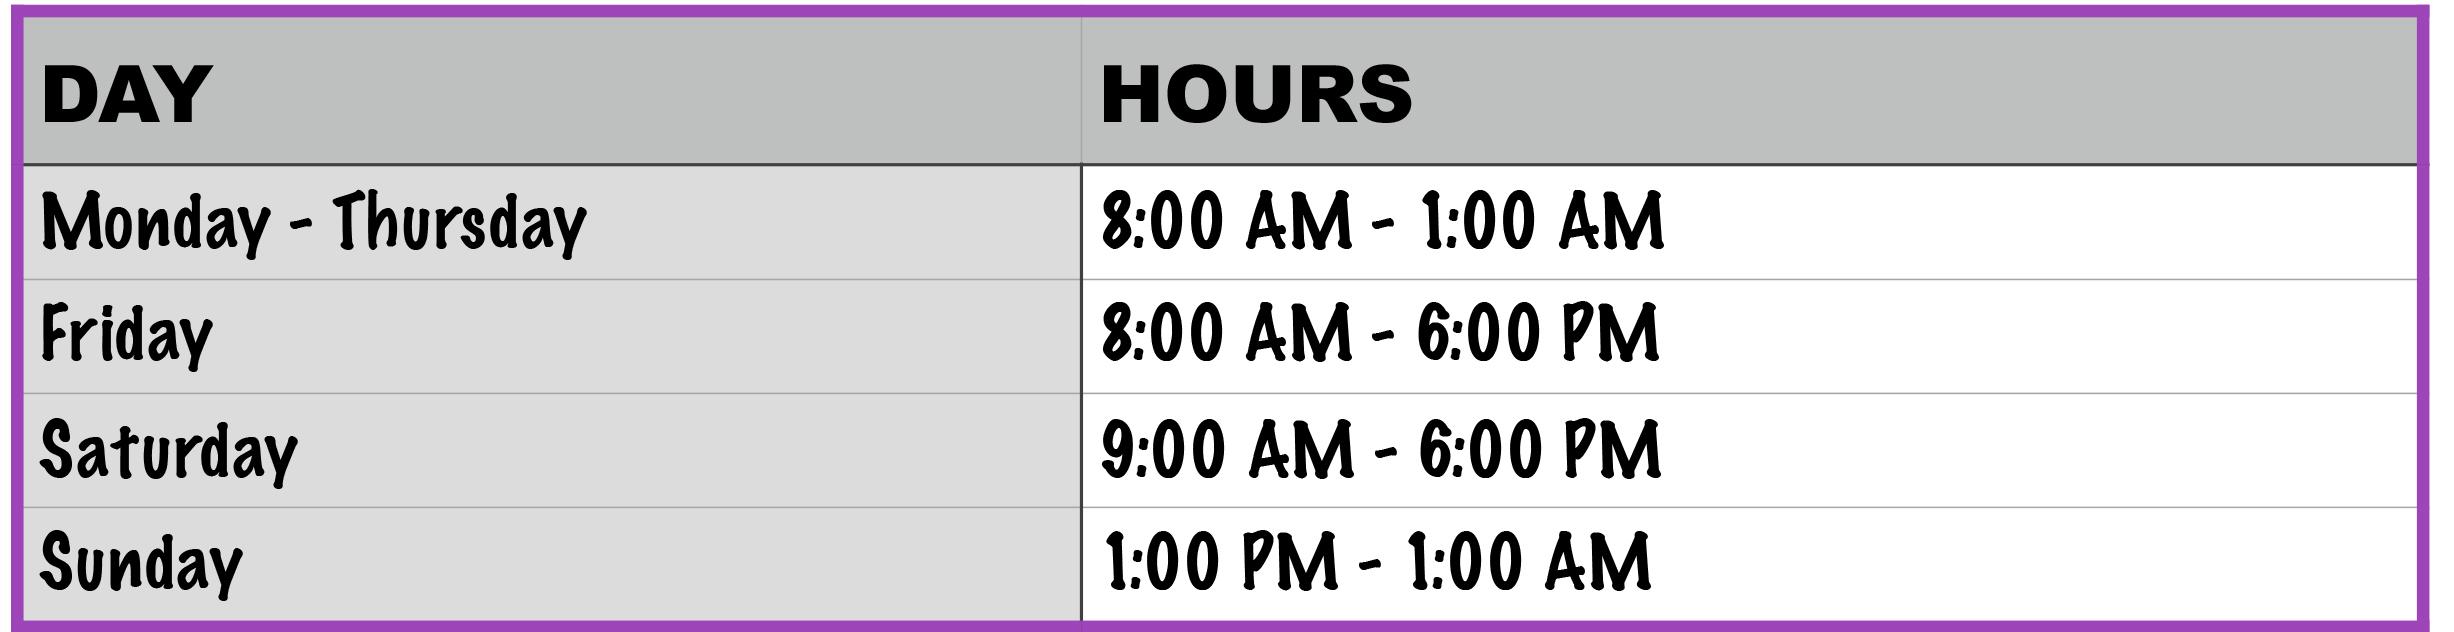 EXTENDED HOURS GRAPH